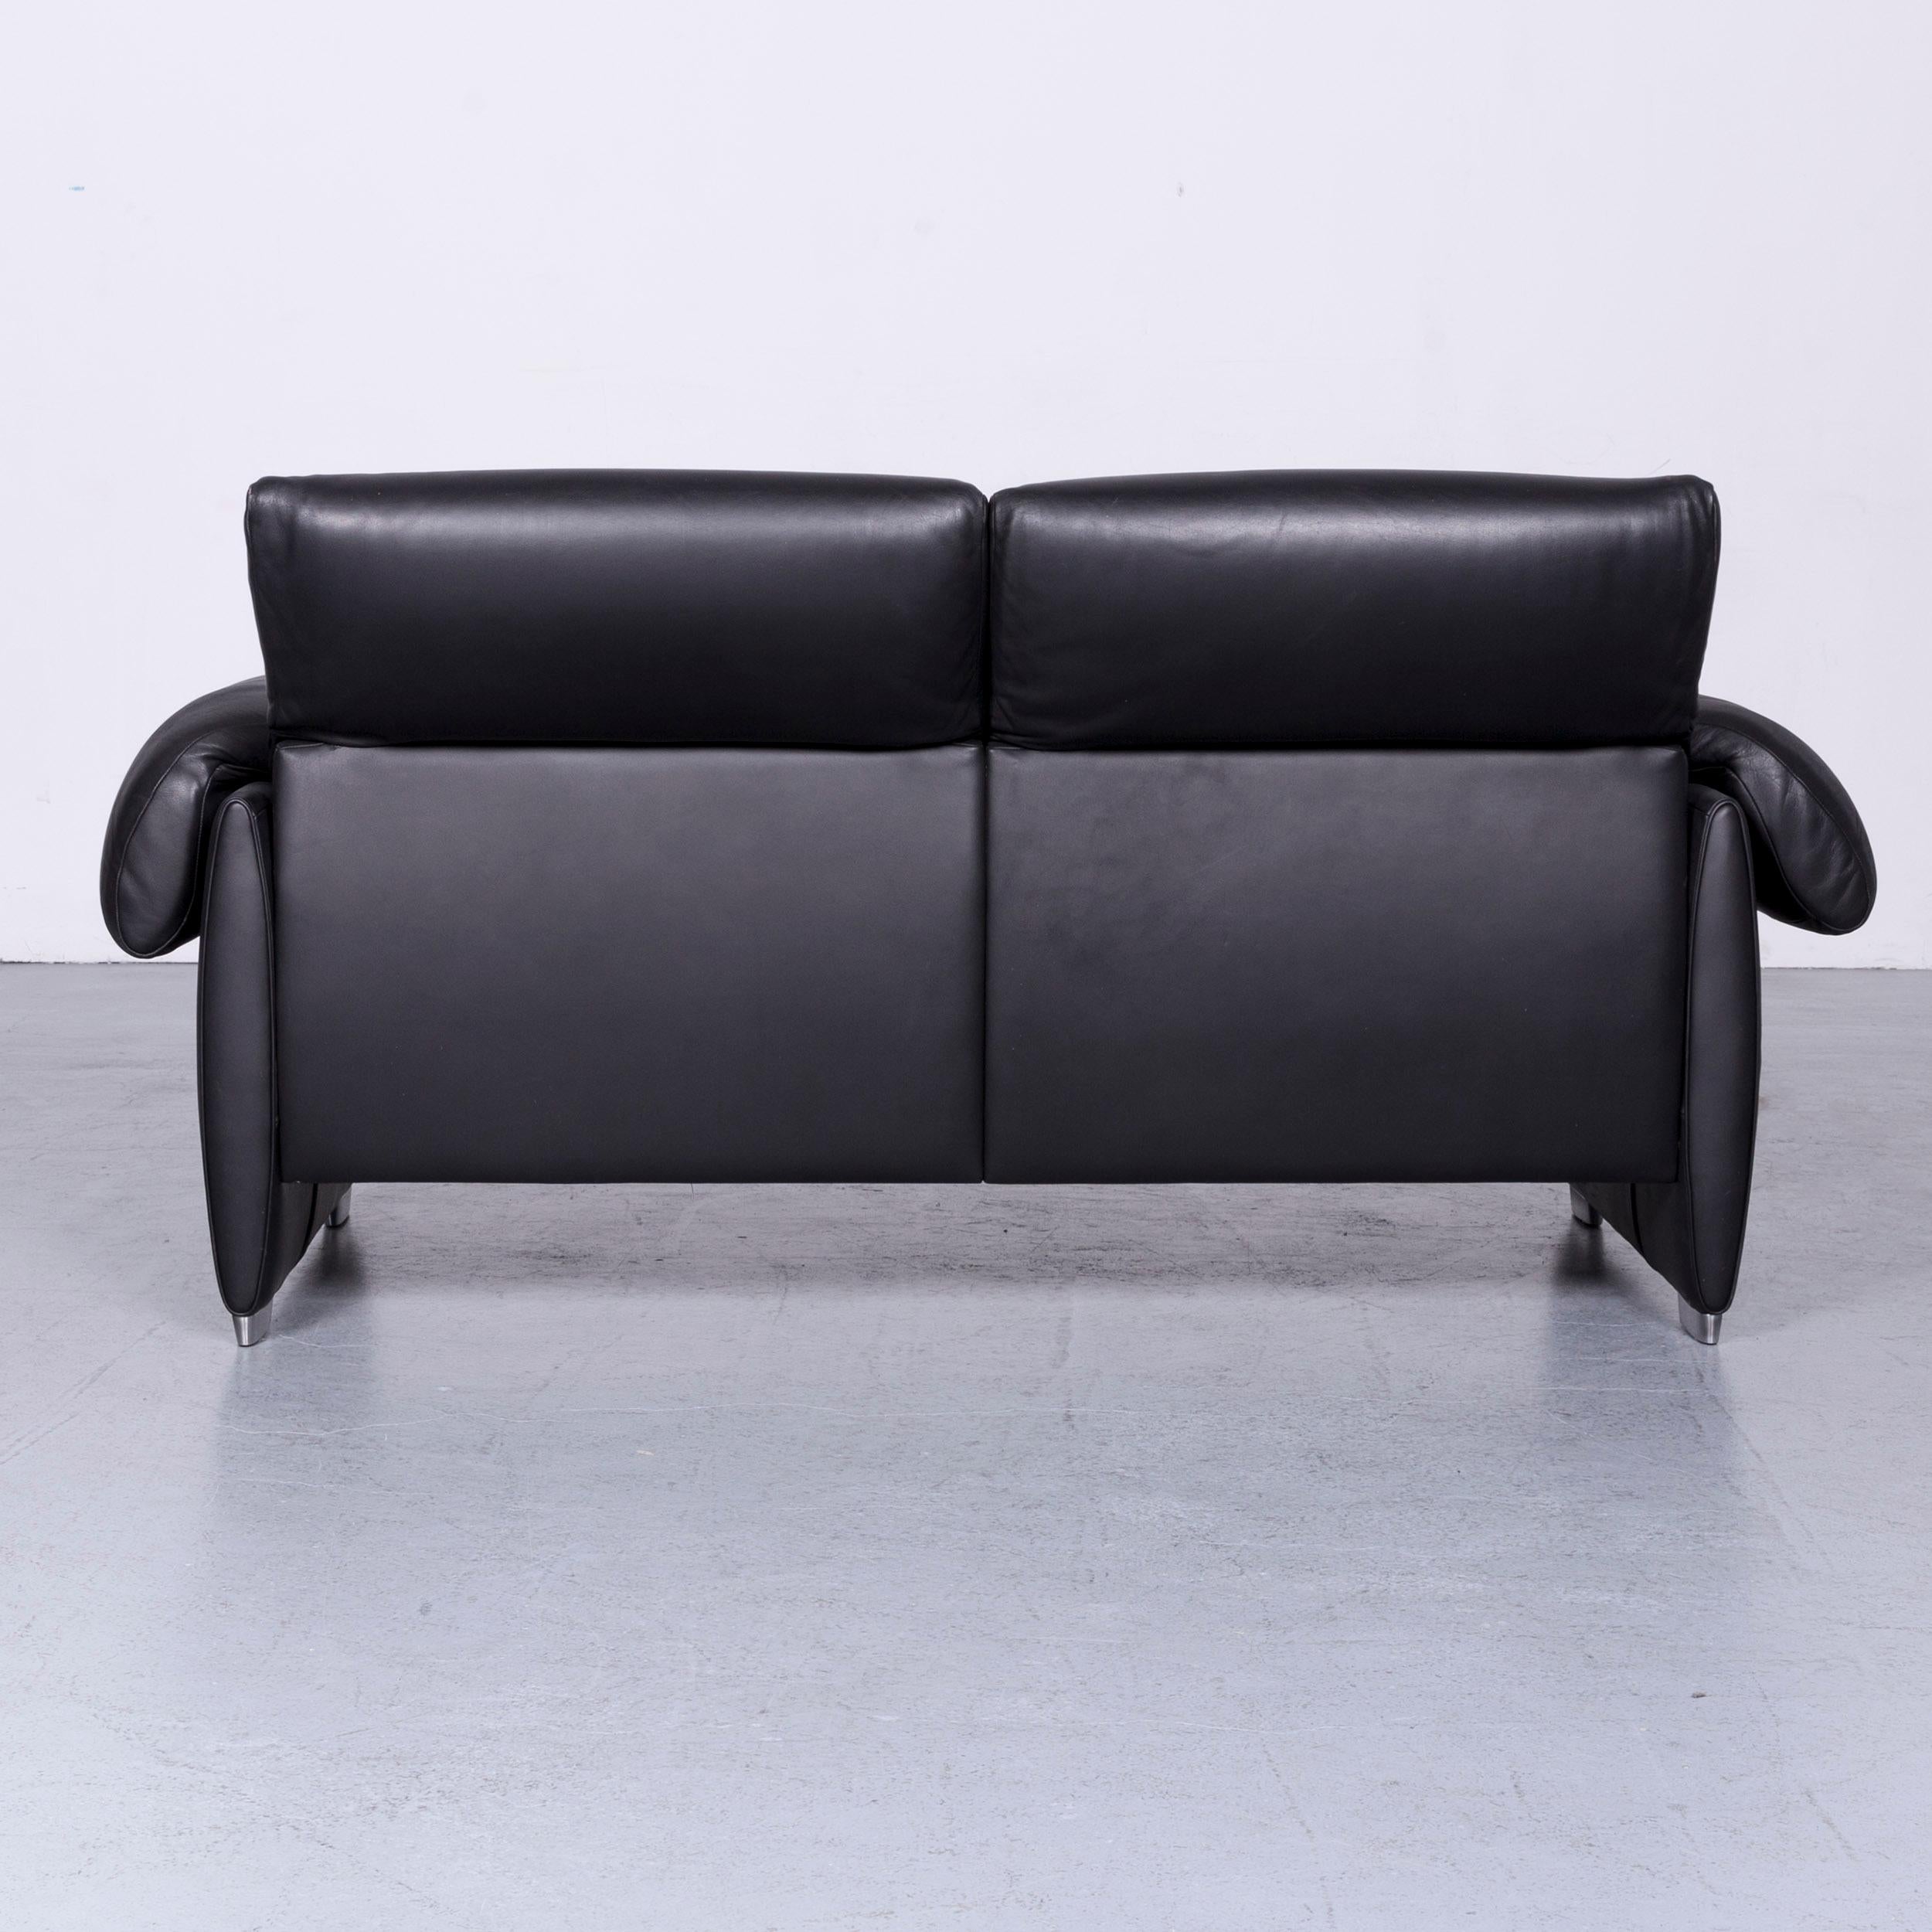 De Sede DS 10 Designer Sofa Black Leather Three-Seat Two-Seat Set Couch 15